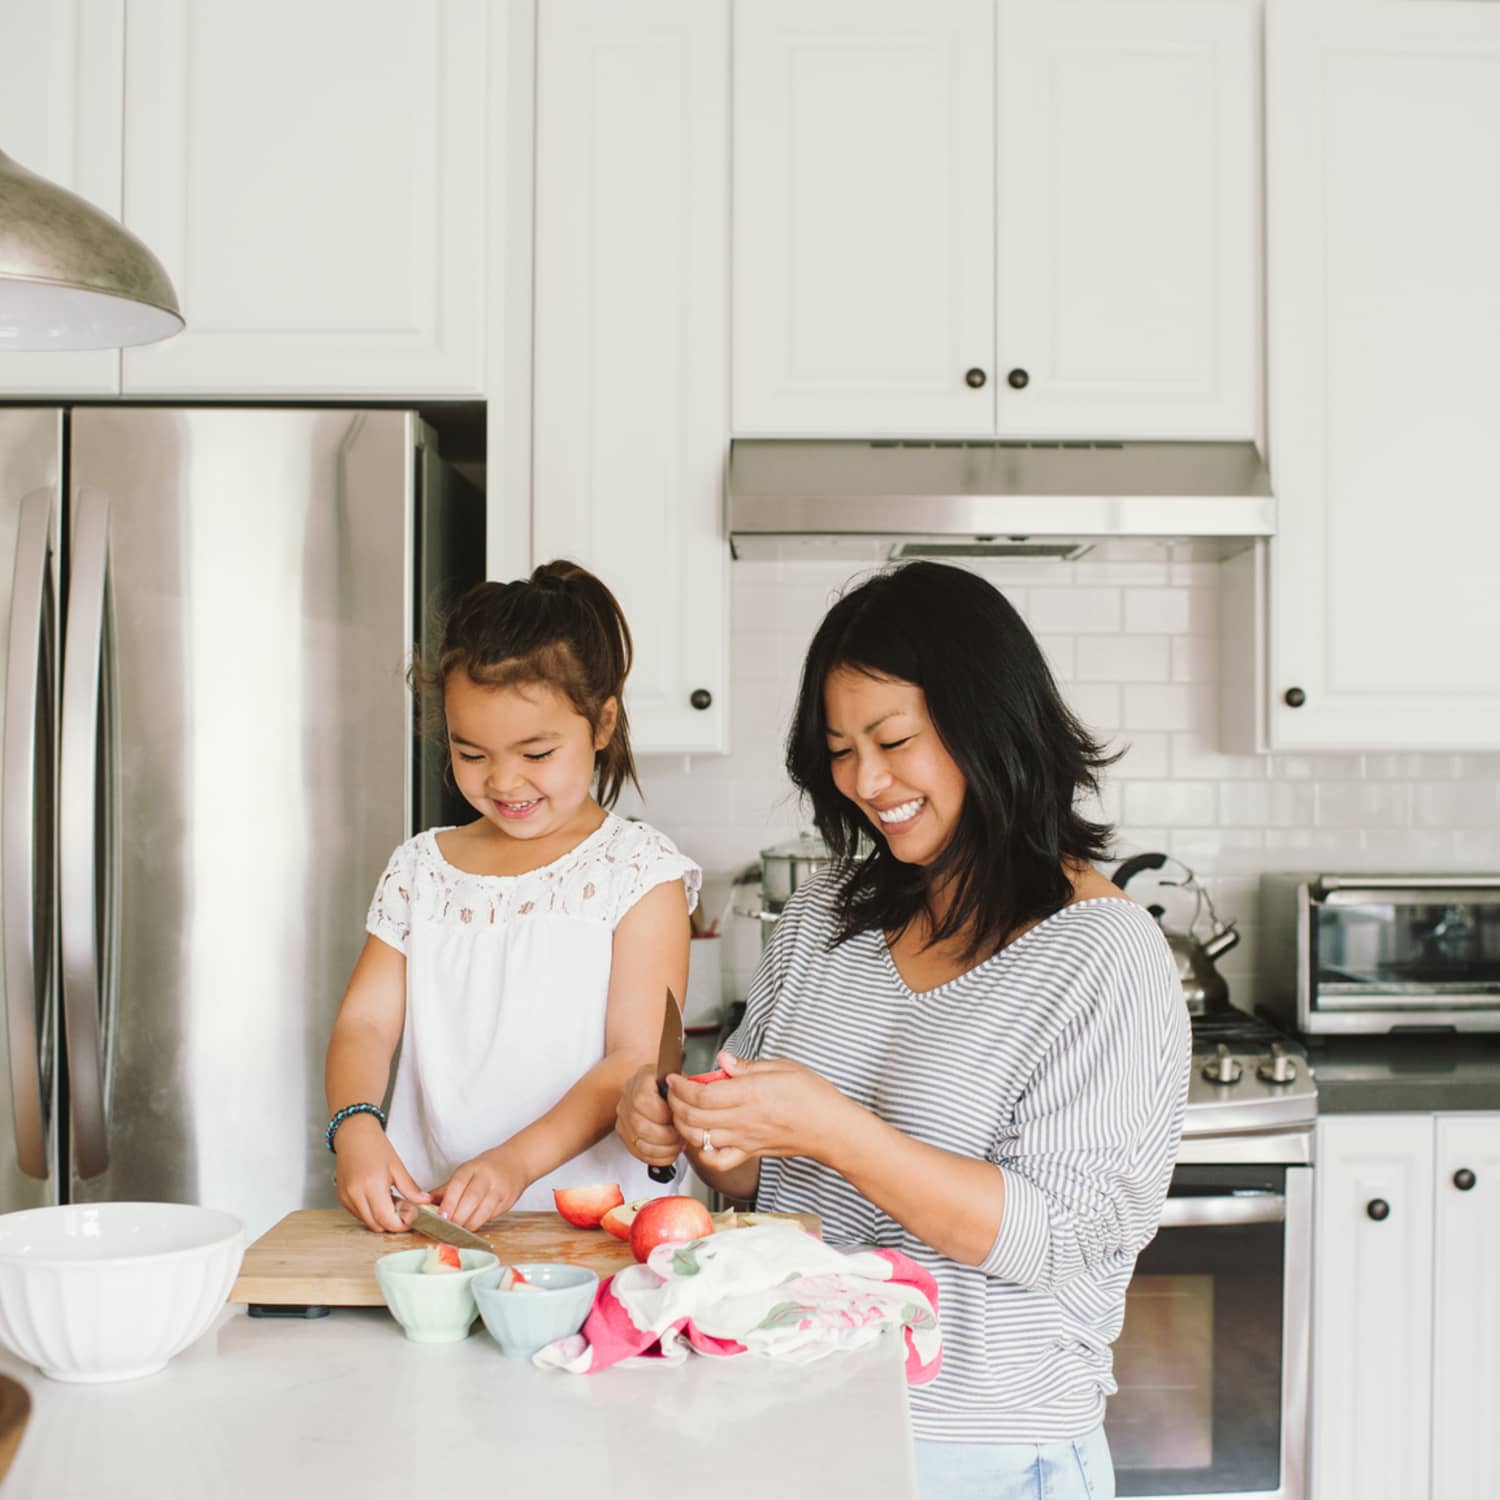 The Best Holiday Gifts for Fun in the Kitchen with Kids! Your